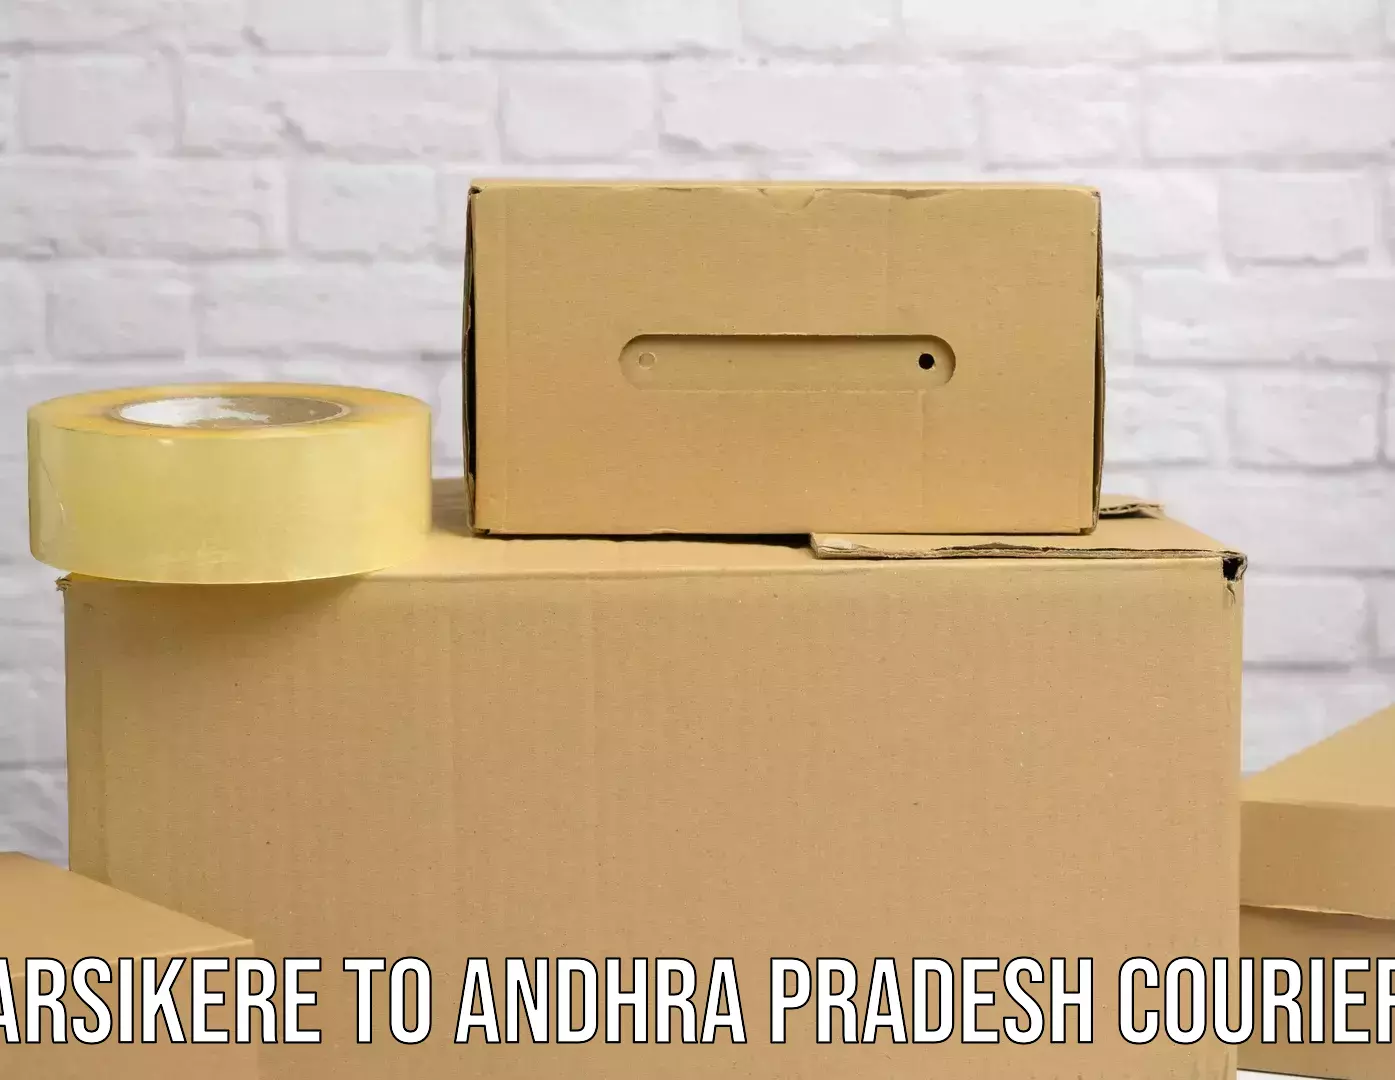 Optimized delivery routes Arsikere to Kambadur